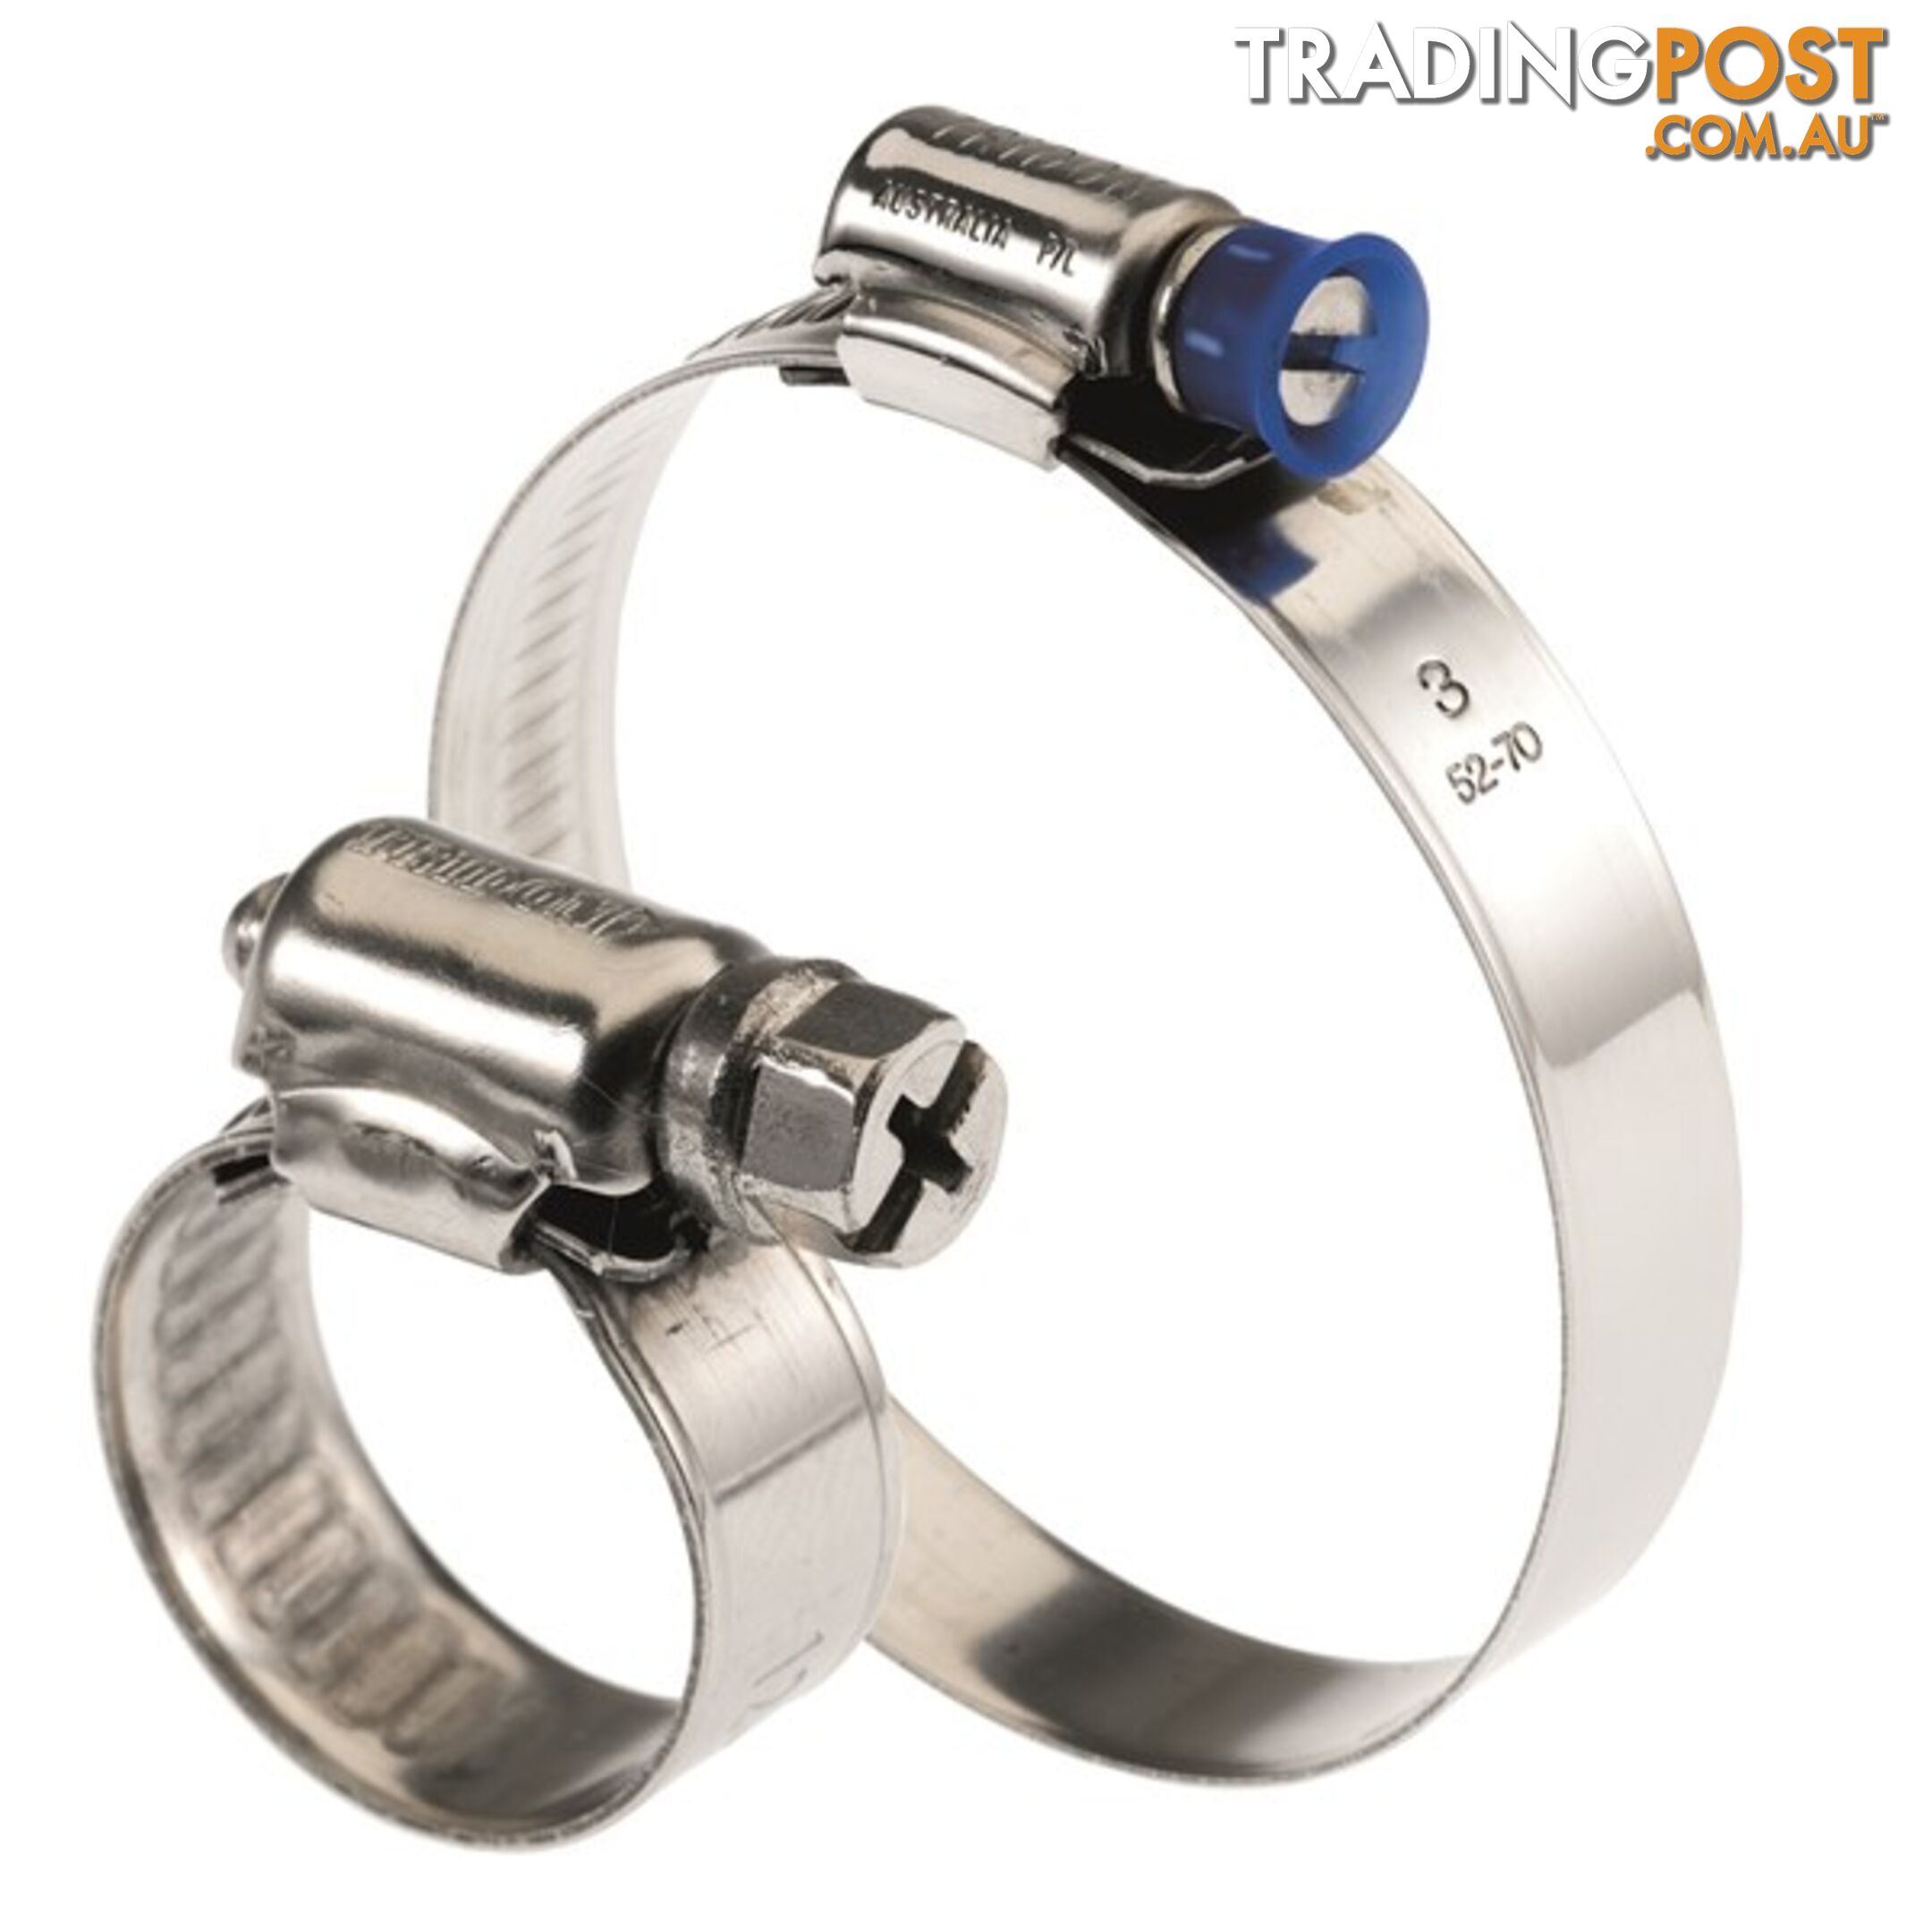 Tridon Hose Clamp 11 -16mm Solid Micro Band Collared (8mm wide) Full S. Steel 10pk SKU - SMPCM00P